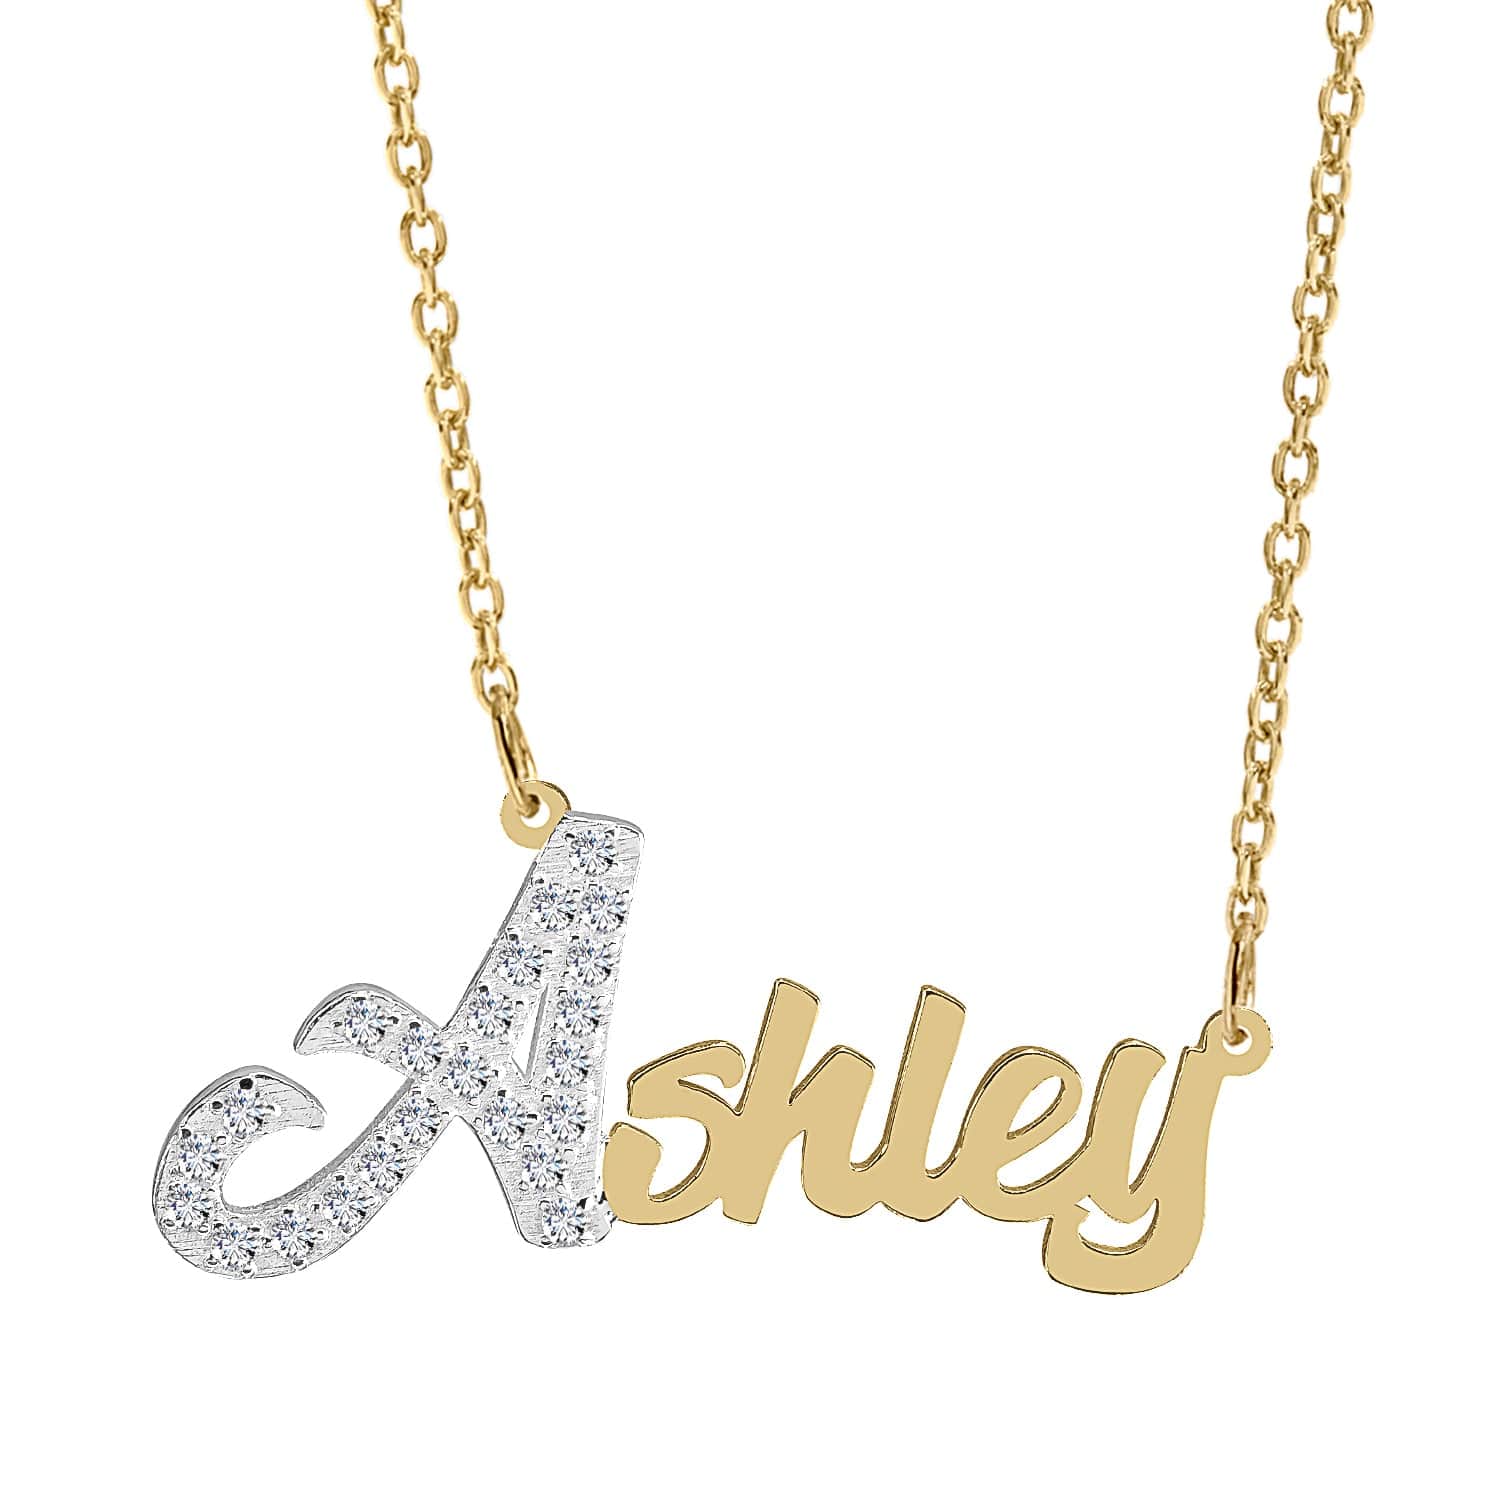 14k Gold over Sterling Silver / Link Chain Single Plated Nameplate Necklace "Ashley" with Stones